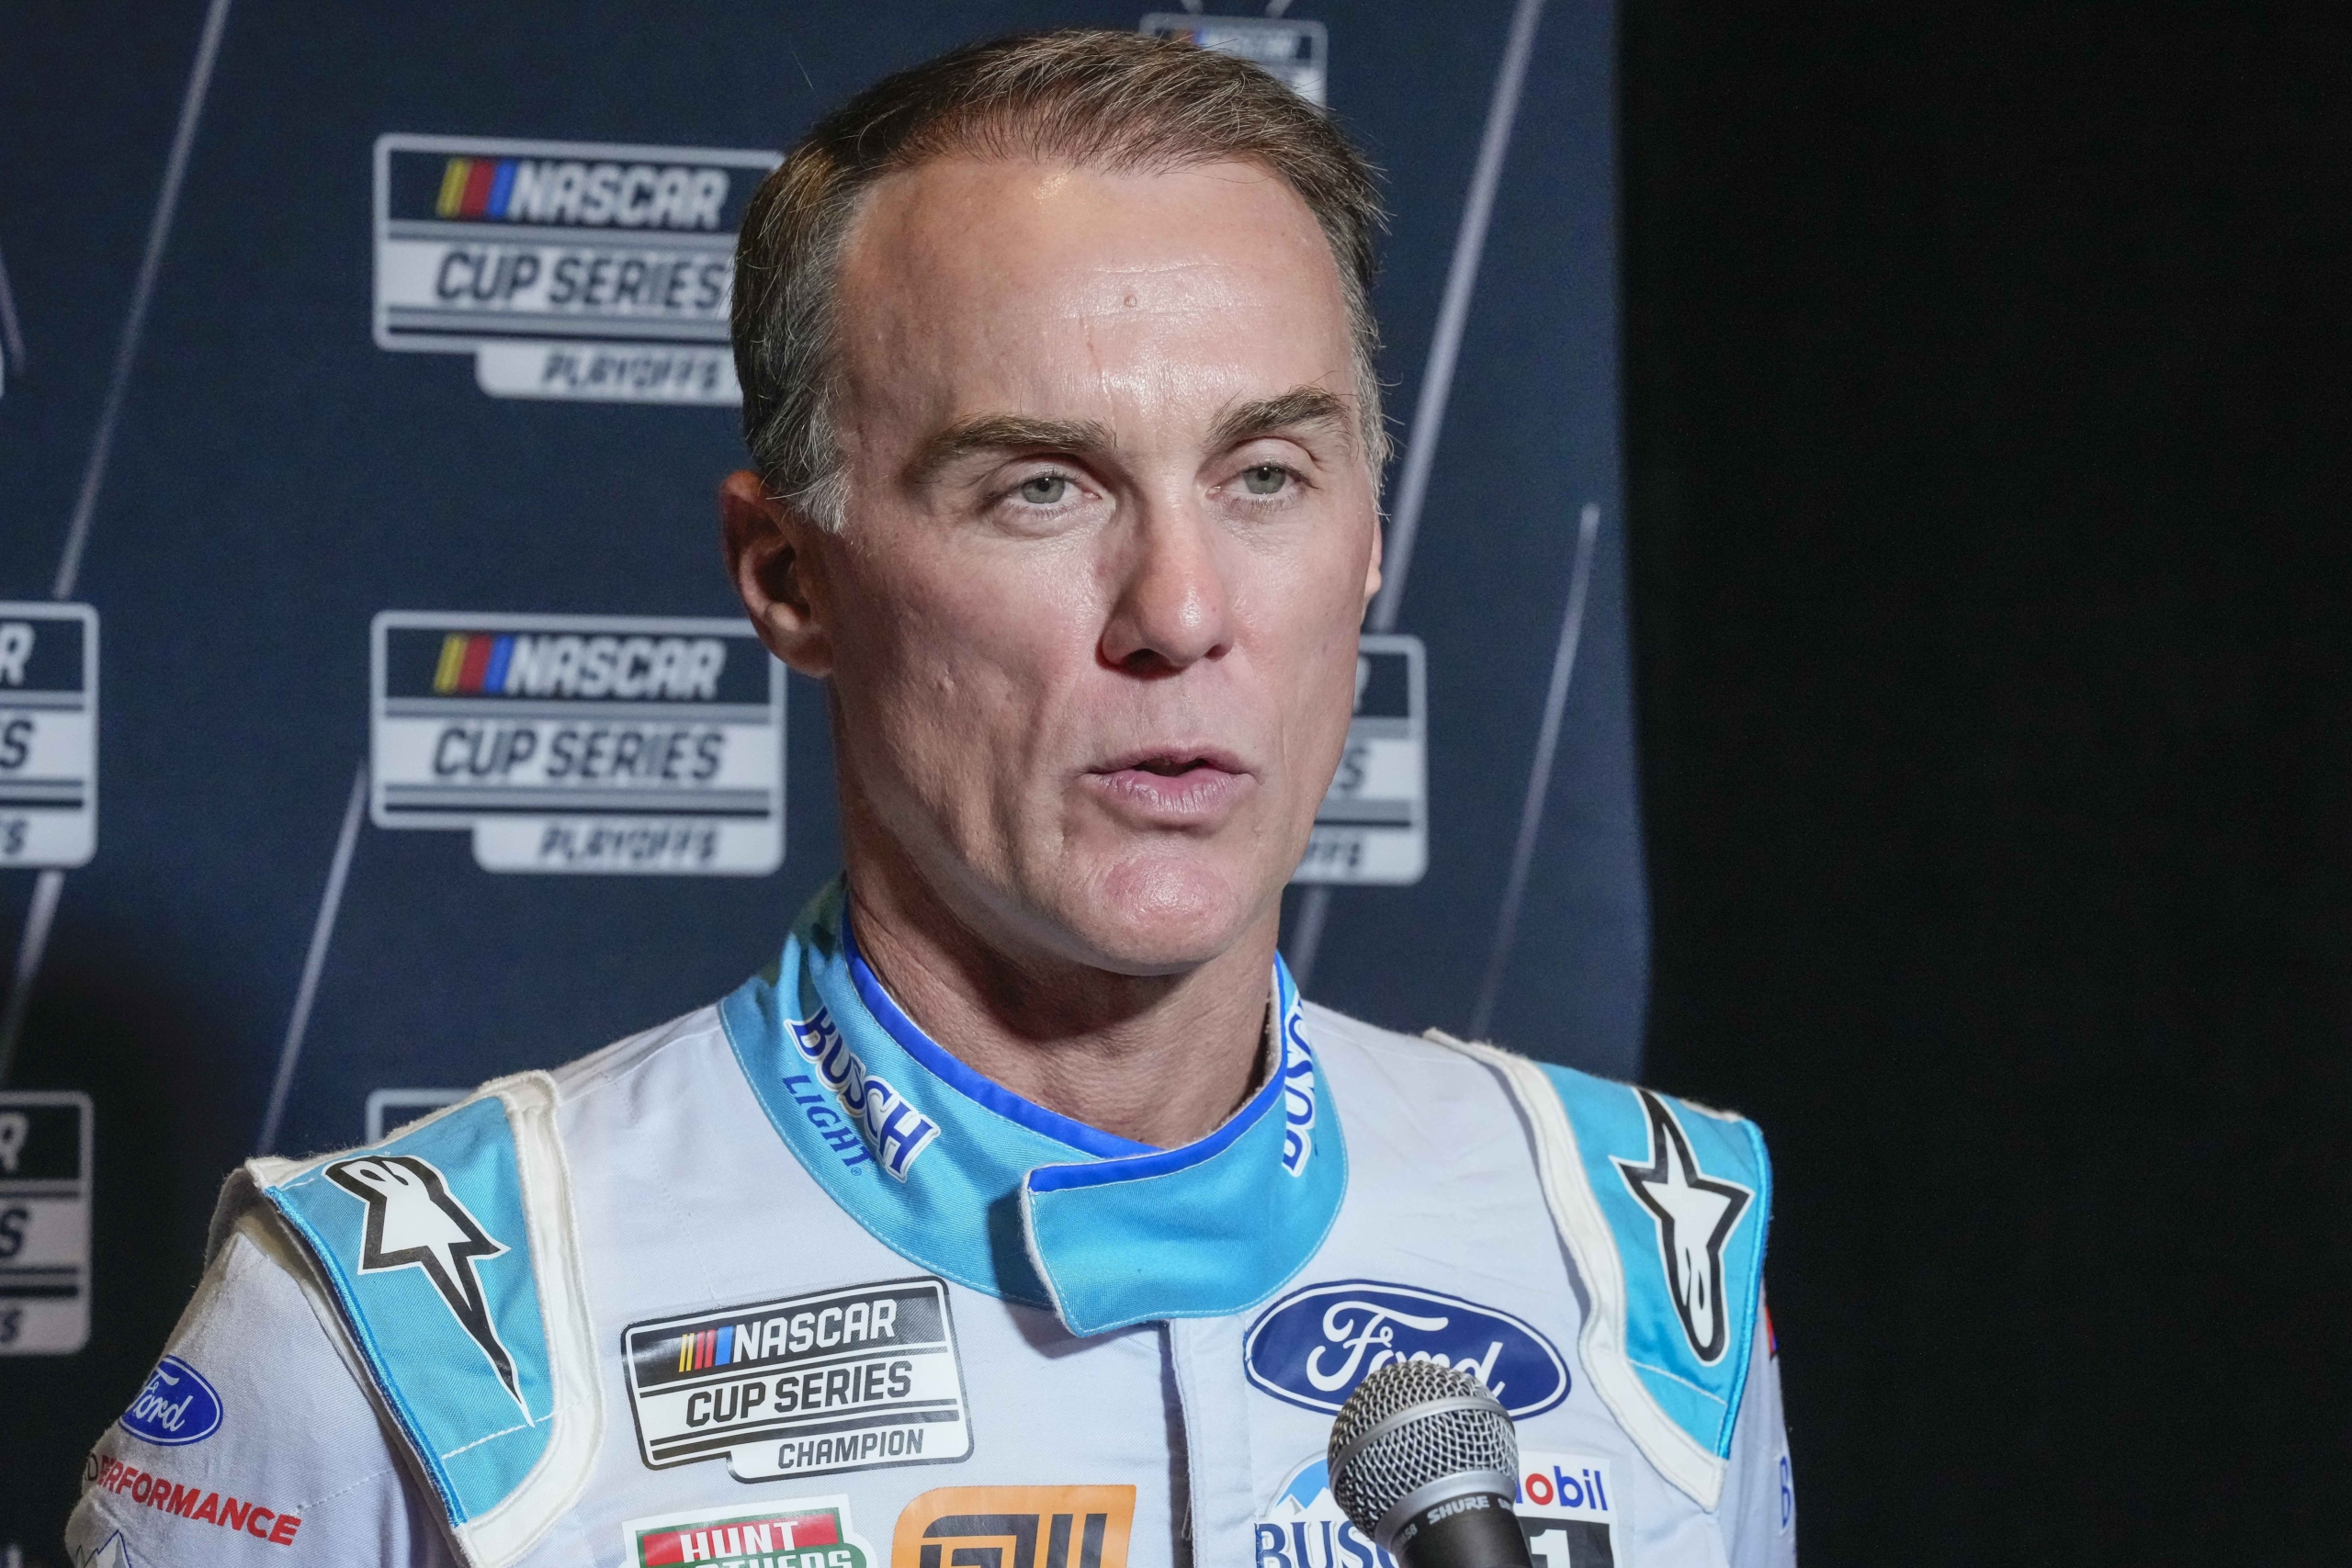 NASCAR: Kevin Harvick speaks the truth about the NextGen car